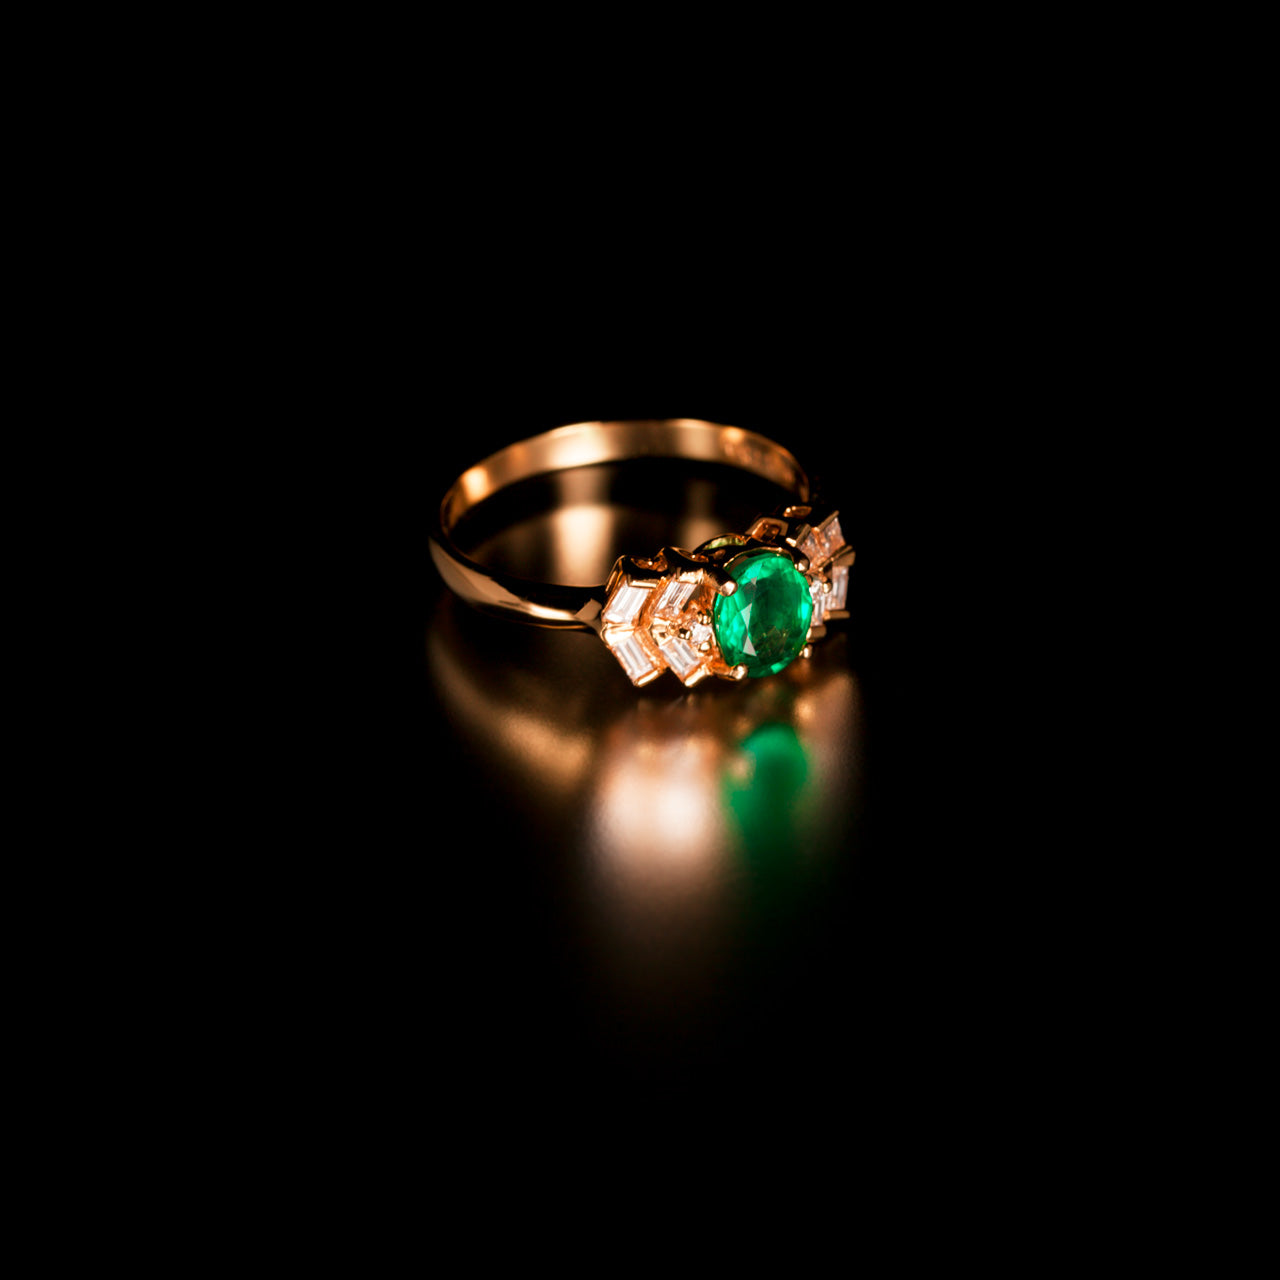 0.63ct natural emerald set in 18k yellow gold ring